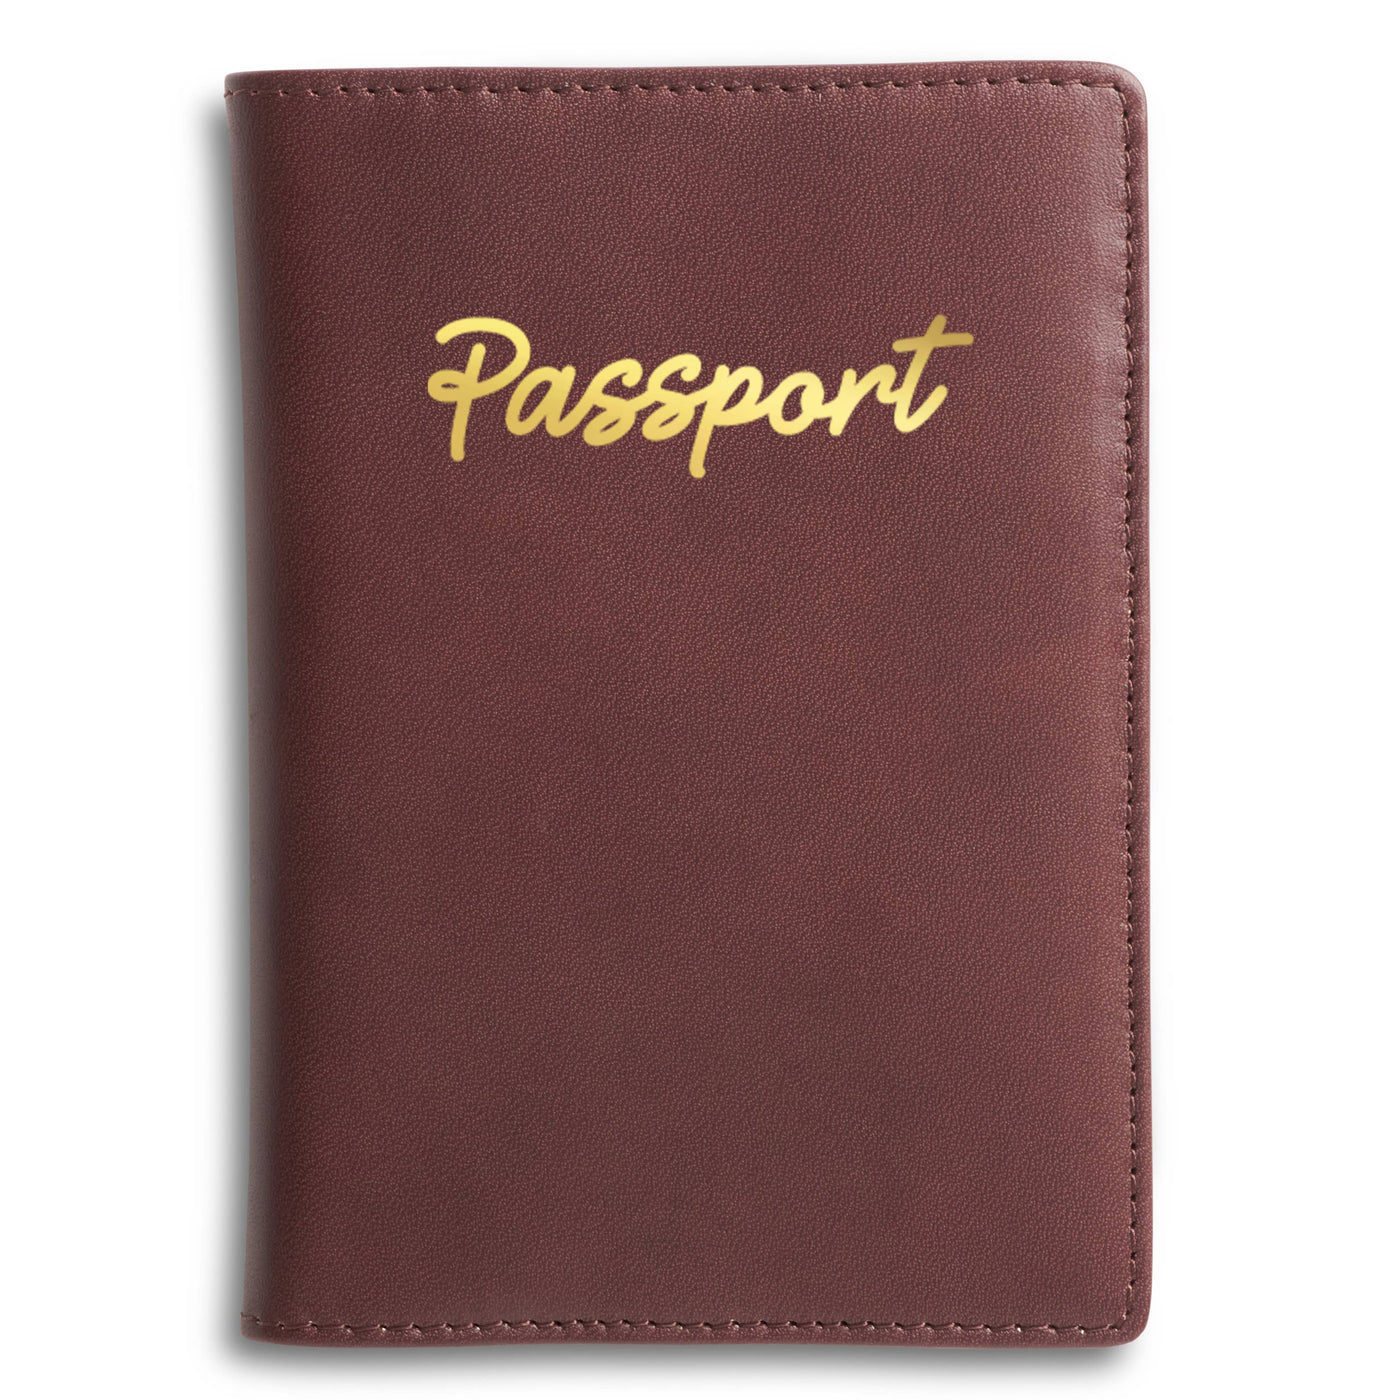 "Tommy" Leather Passport Cover (MGS PASSPORT/GOLD)